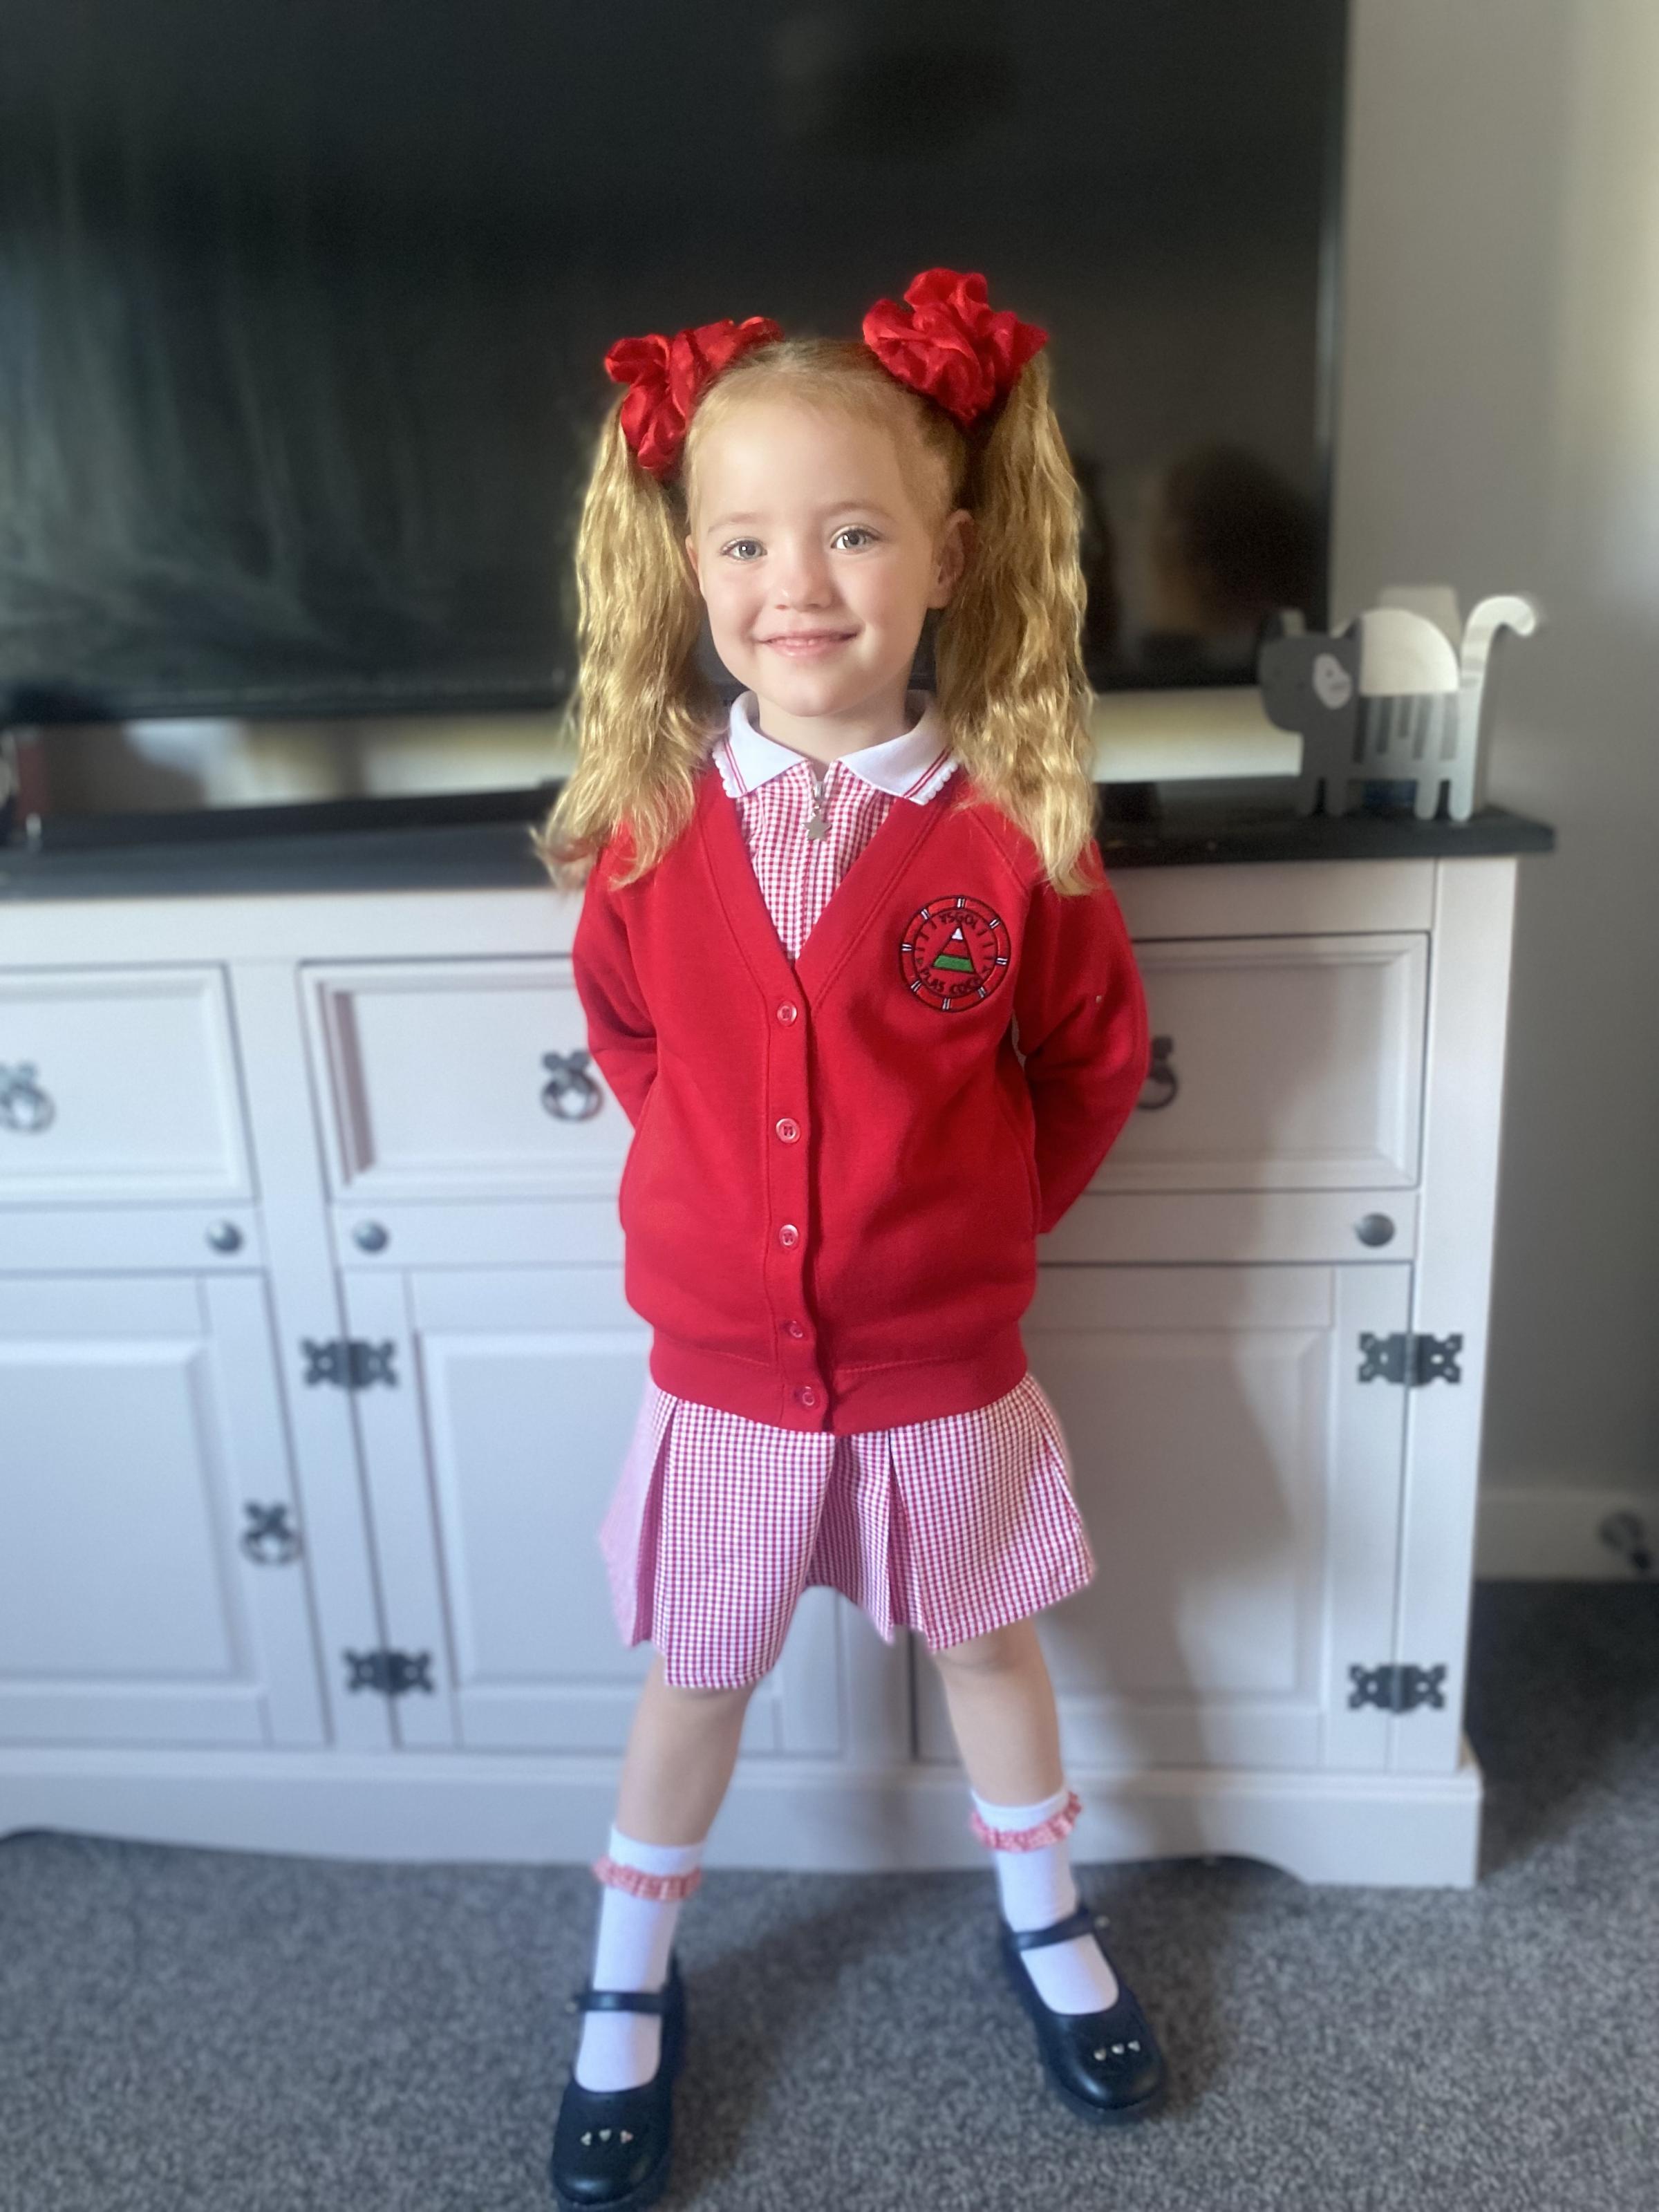 Shannon Bateman, from Wrexham: Mia, ready for her first day in Year 1.